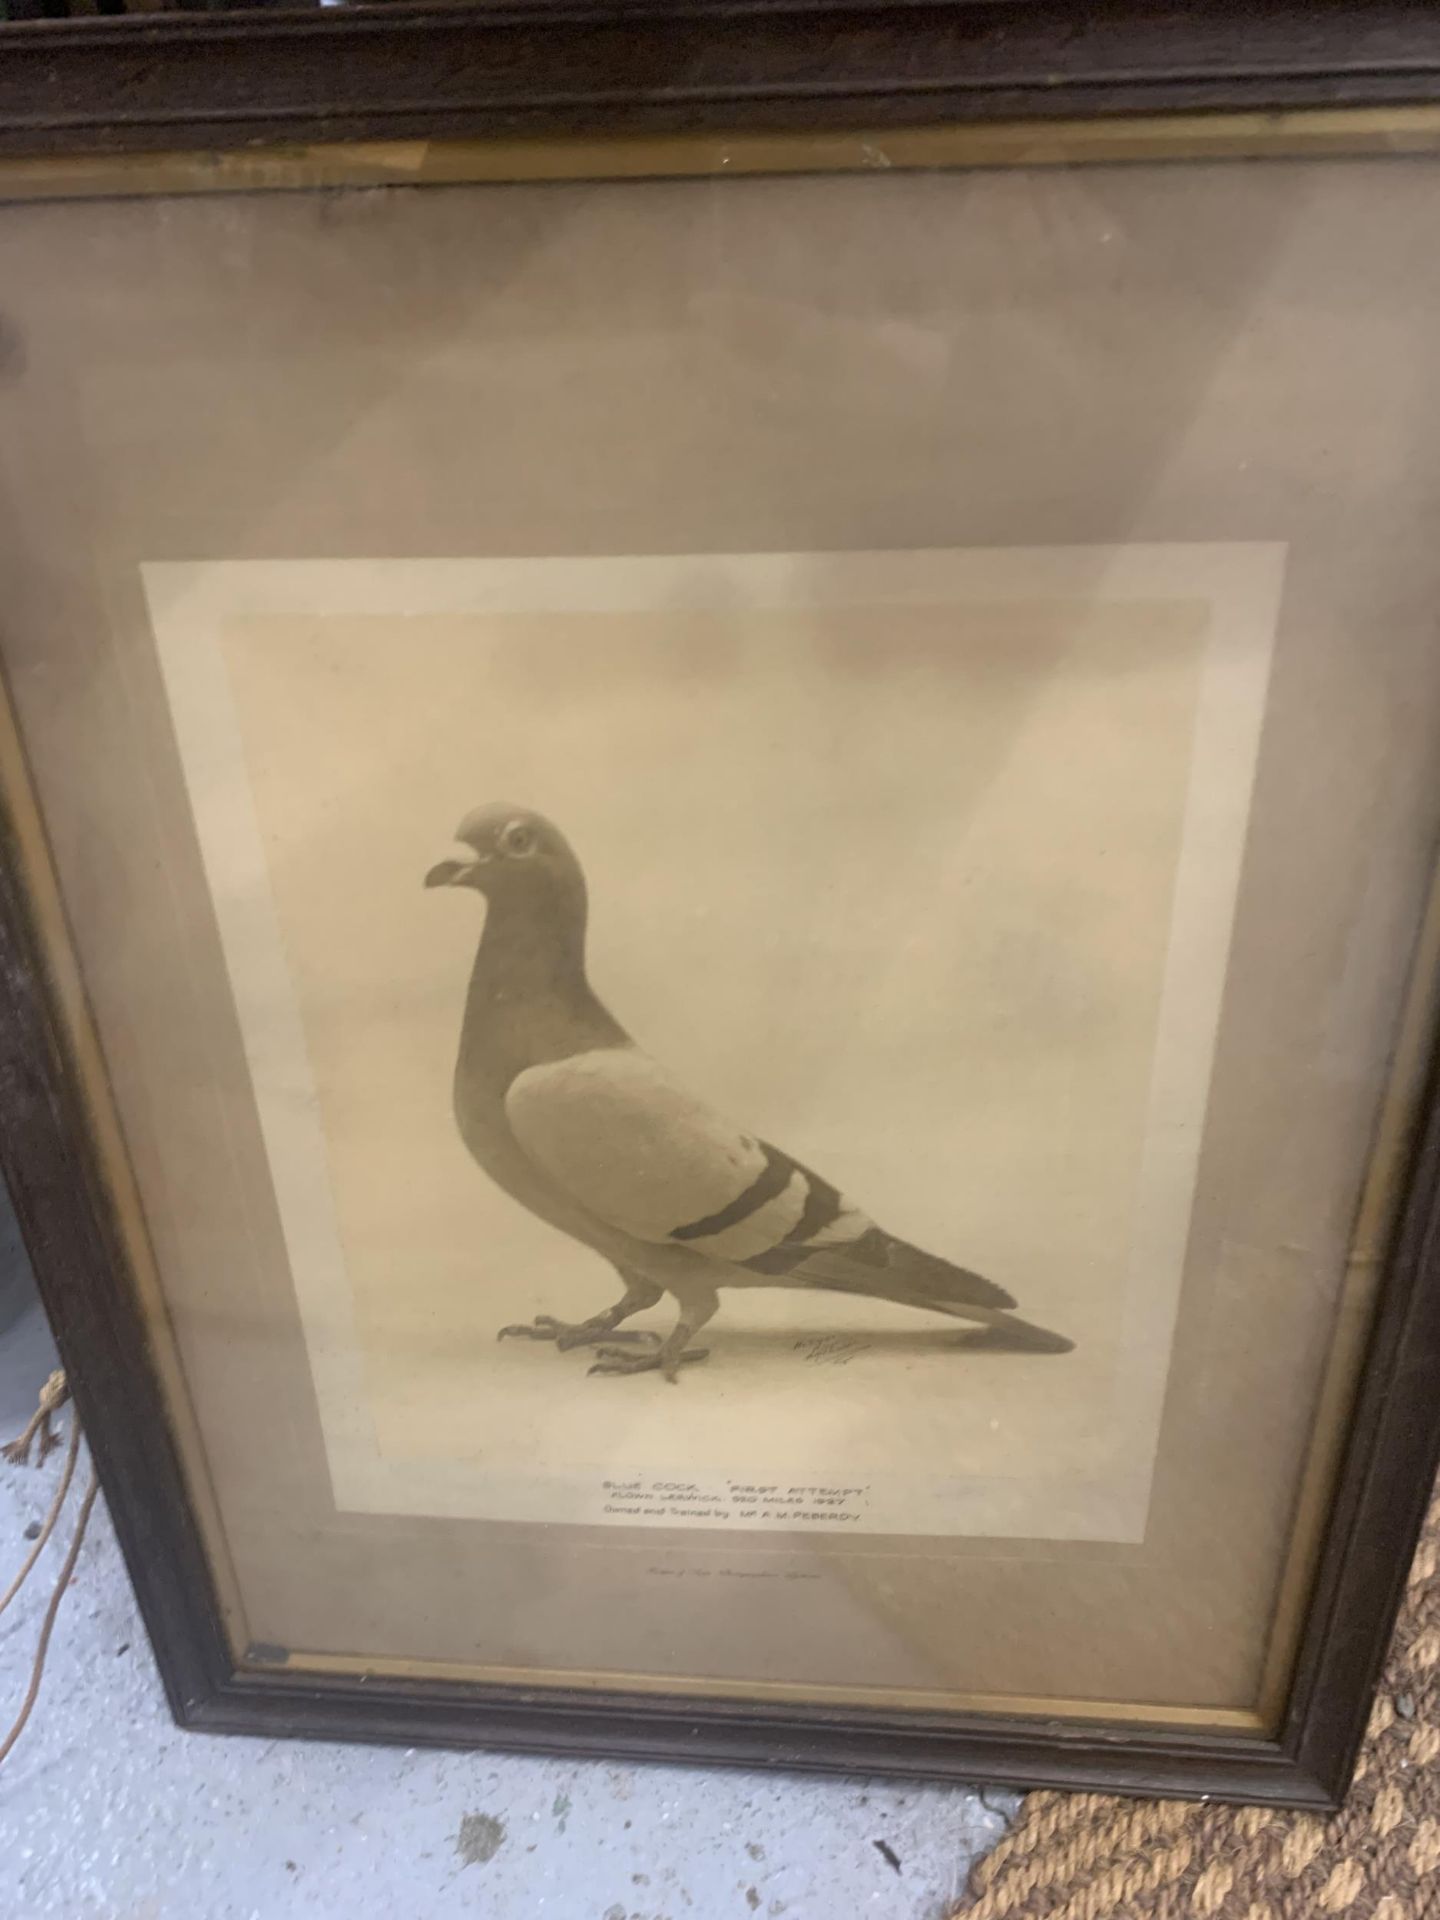 TWO FRAMED PRINTS OF CHAMPION PIGEONS PLUS A PRINT OF GREYHOUND 'BEN TINTO' - Image 3 of 3